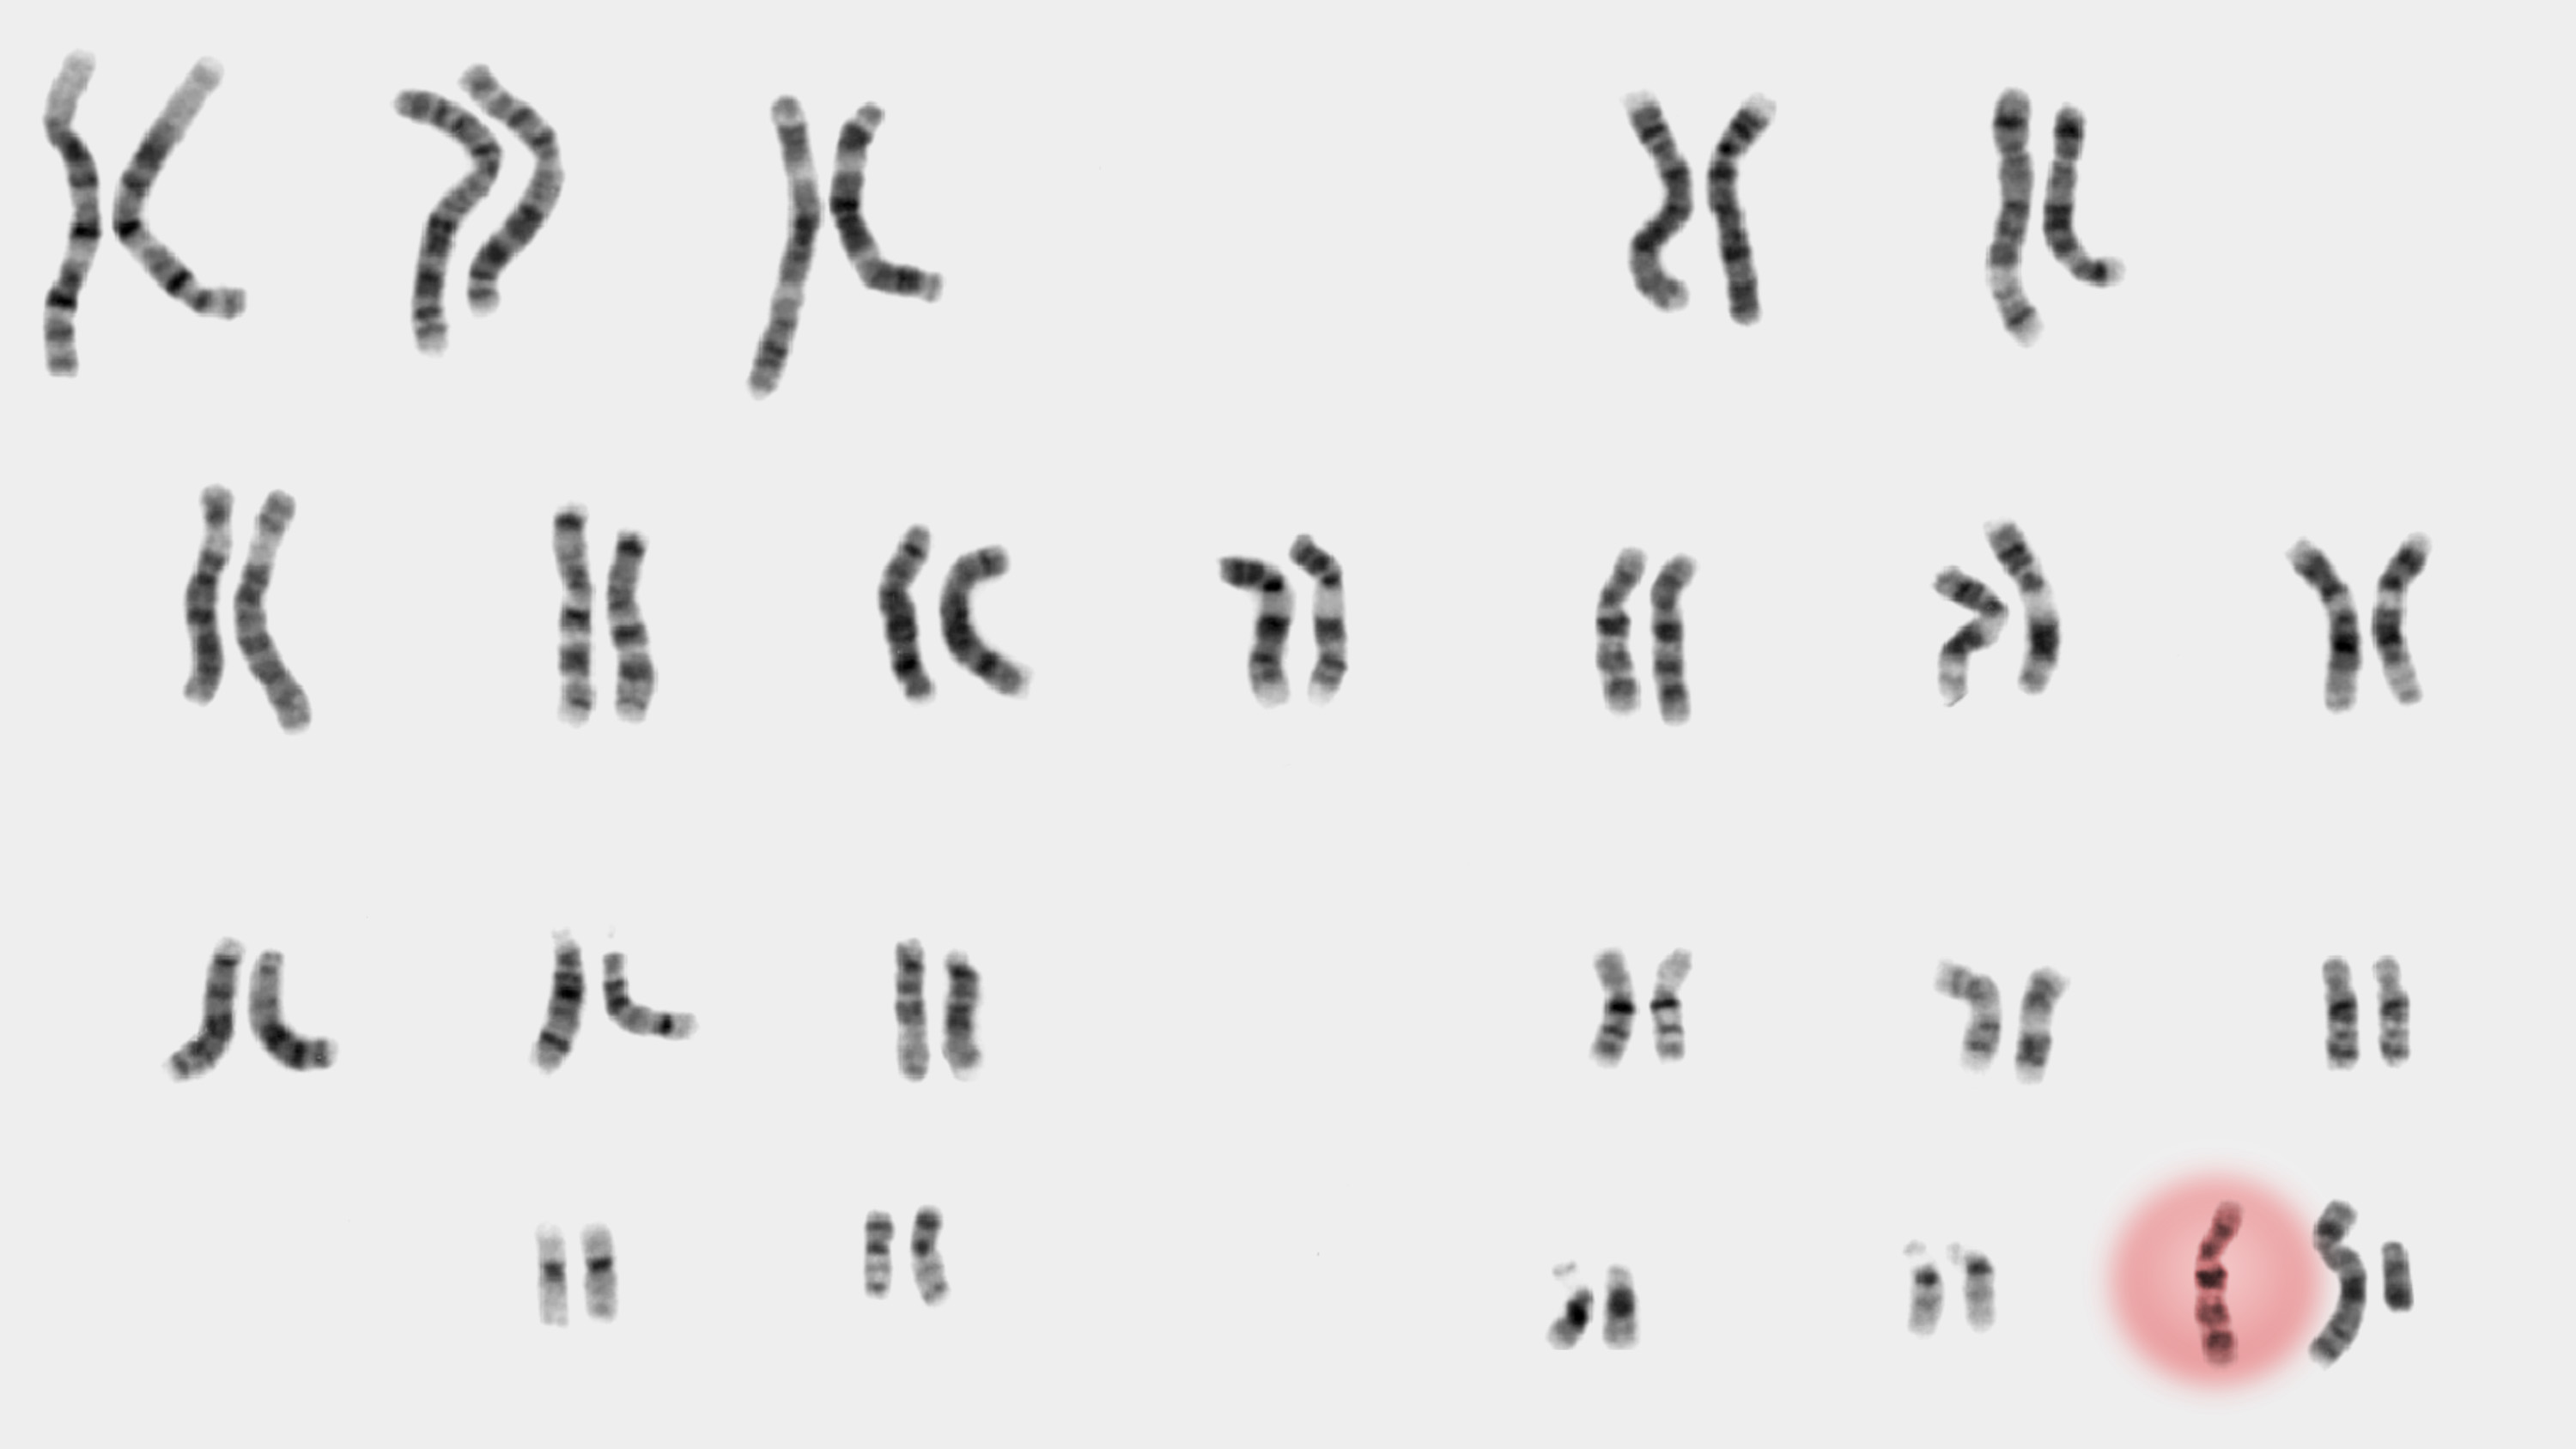 chromosome pairs with an additional chromosome highlighted